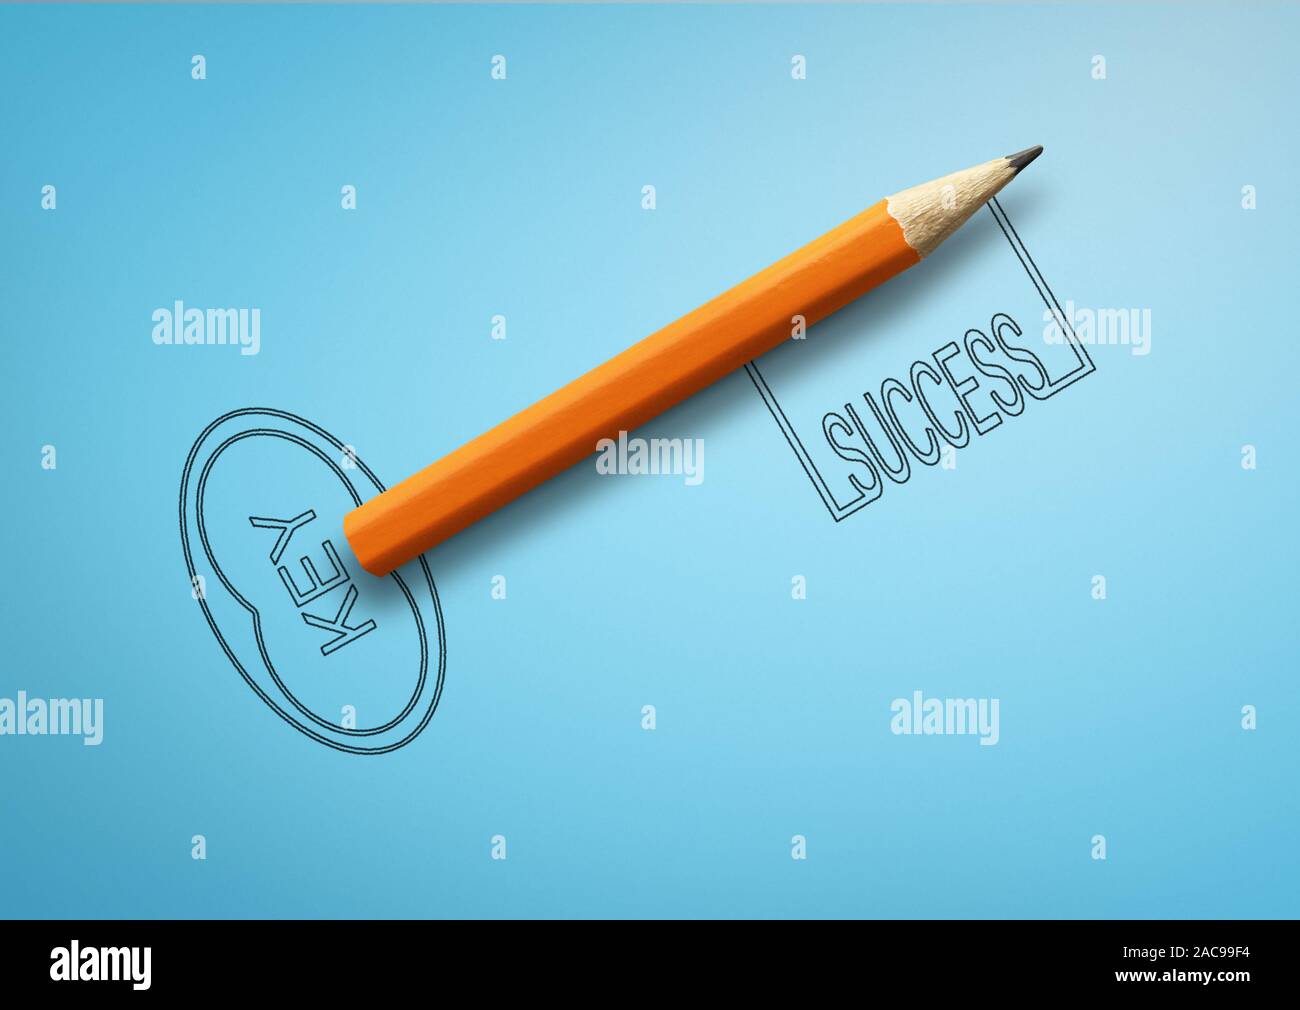 Key to success concept, drawn key with pencil on blue Stock Photo